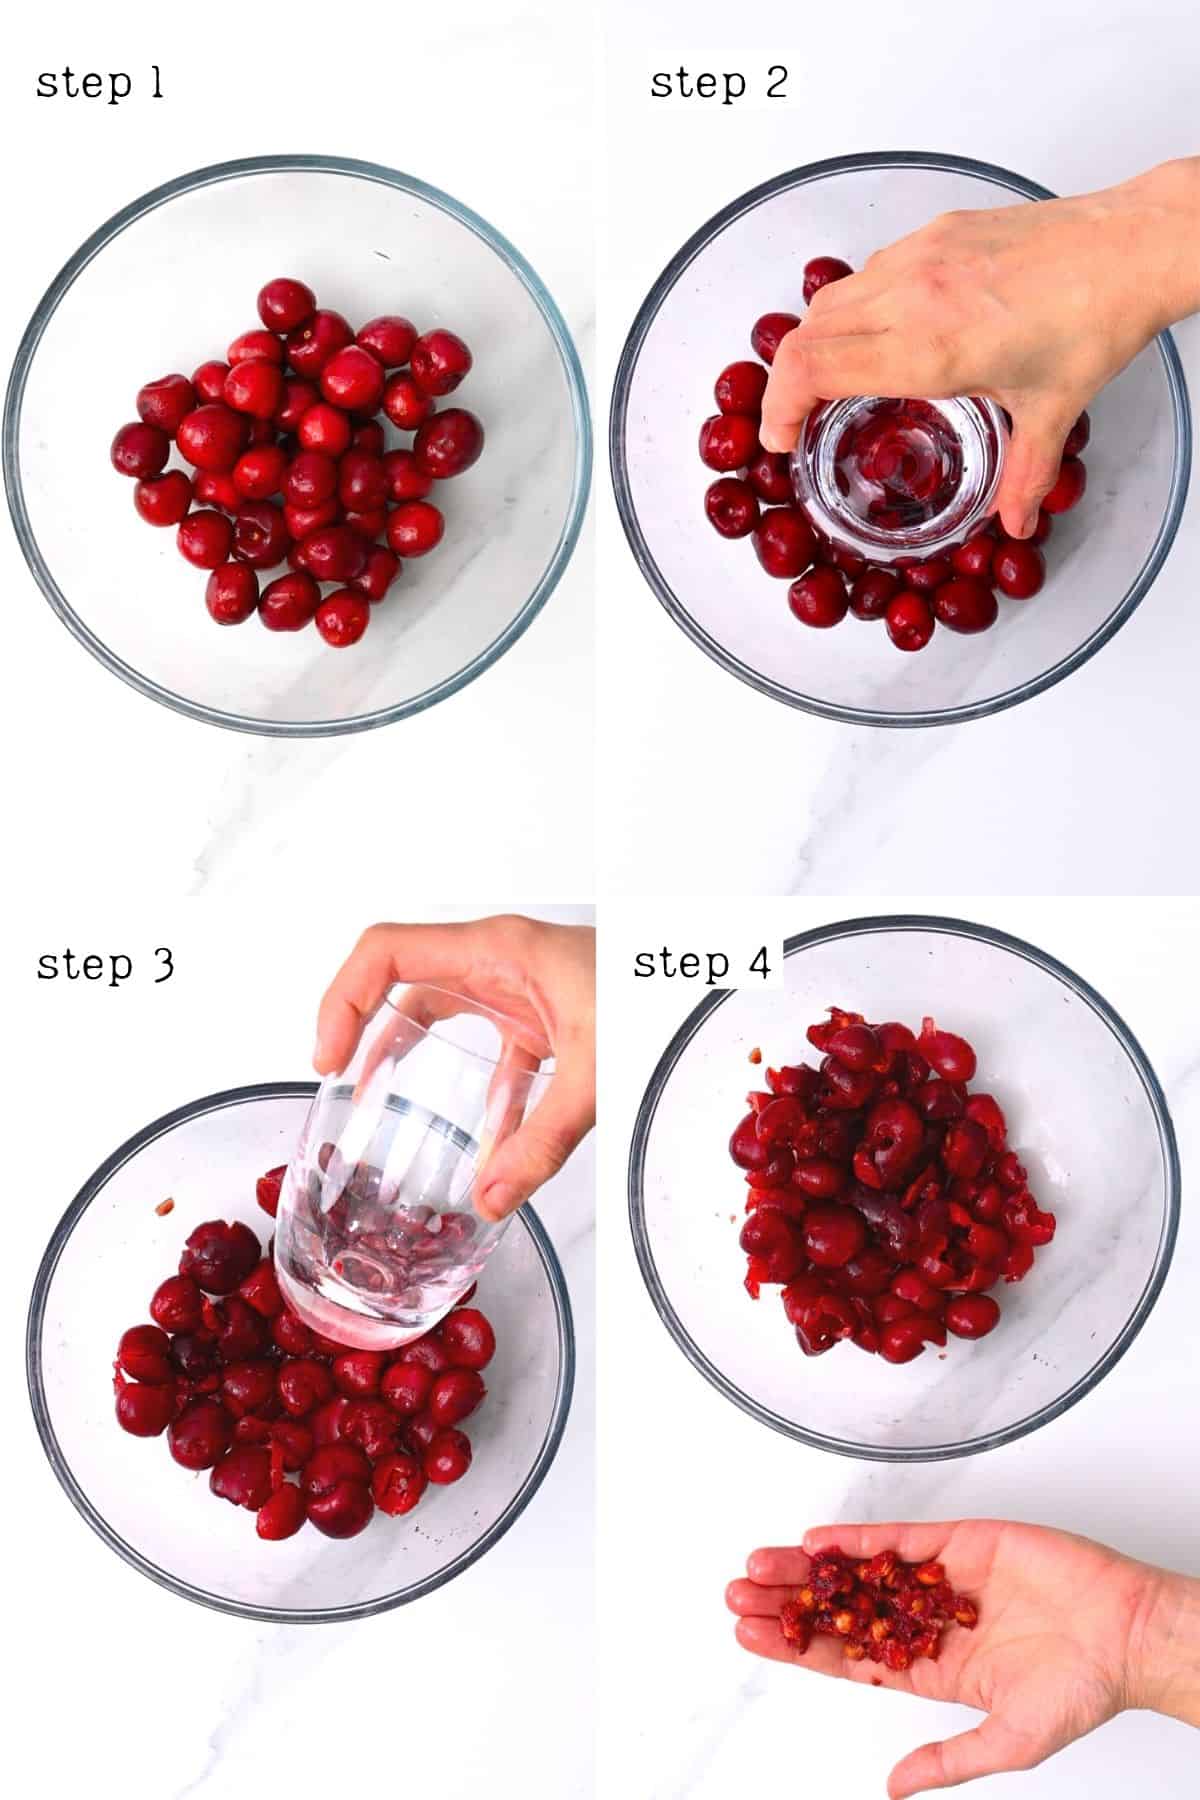 Steps for removing the pits from multiple of cherries at once